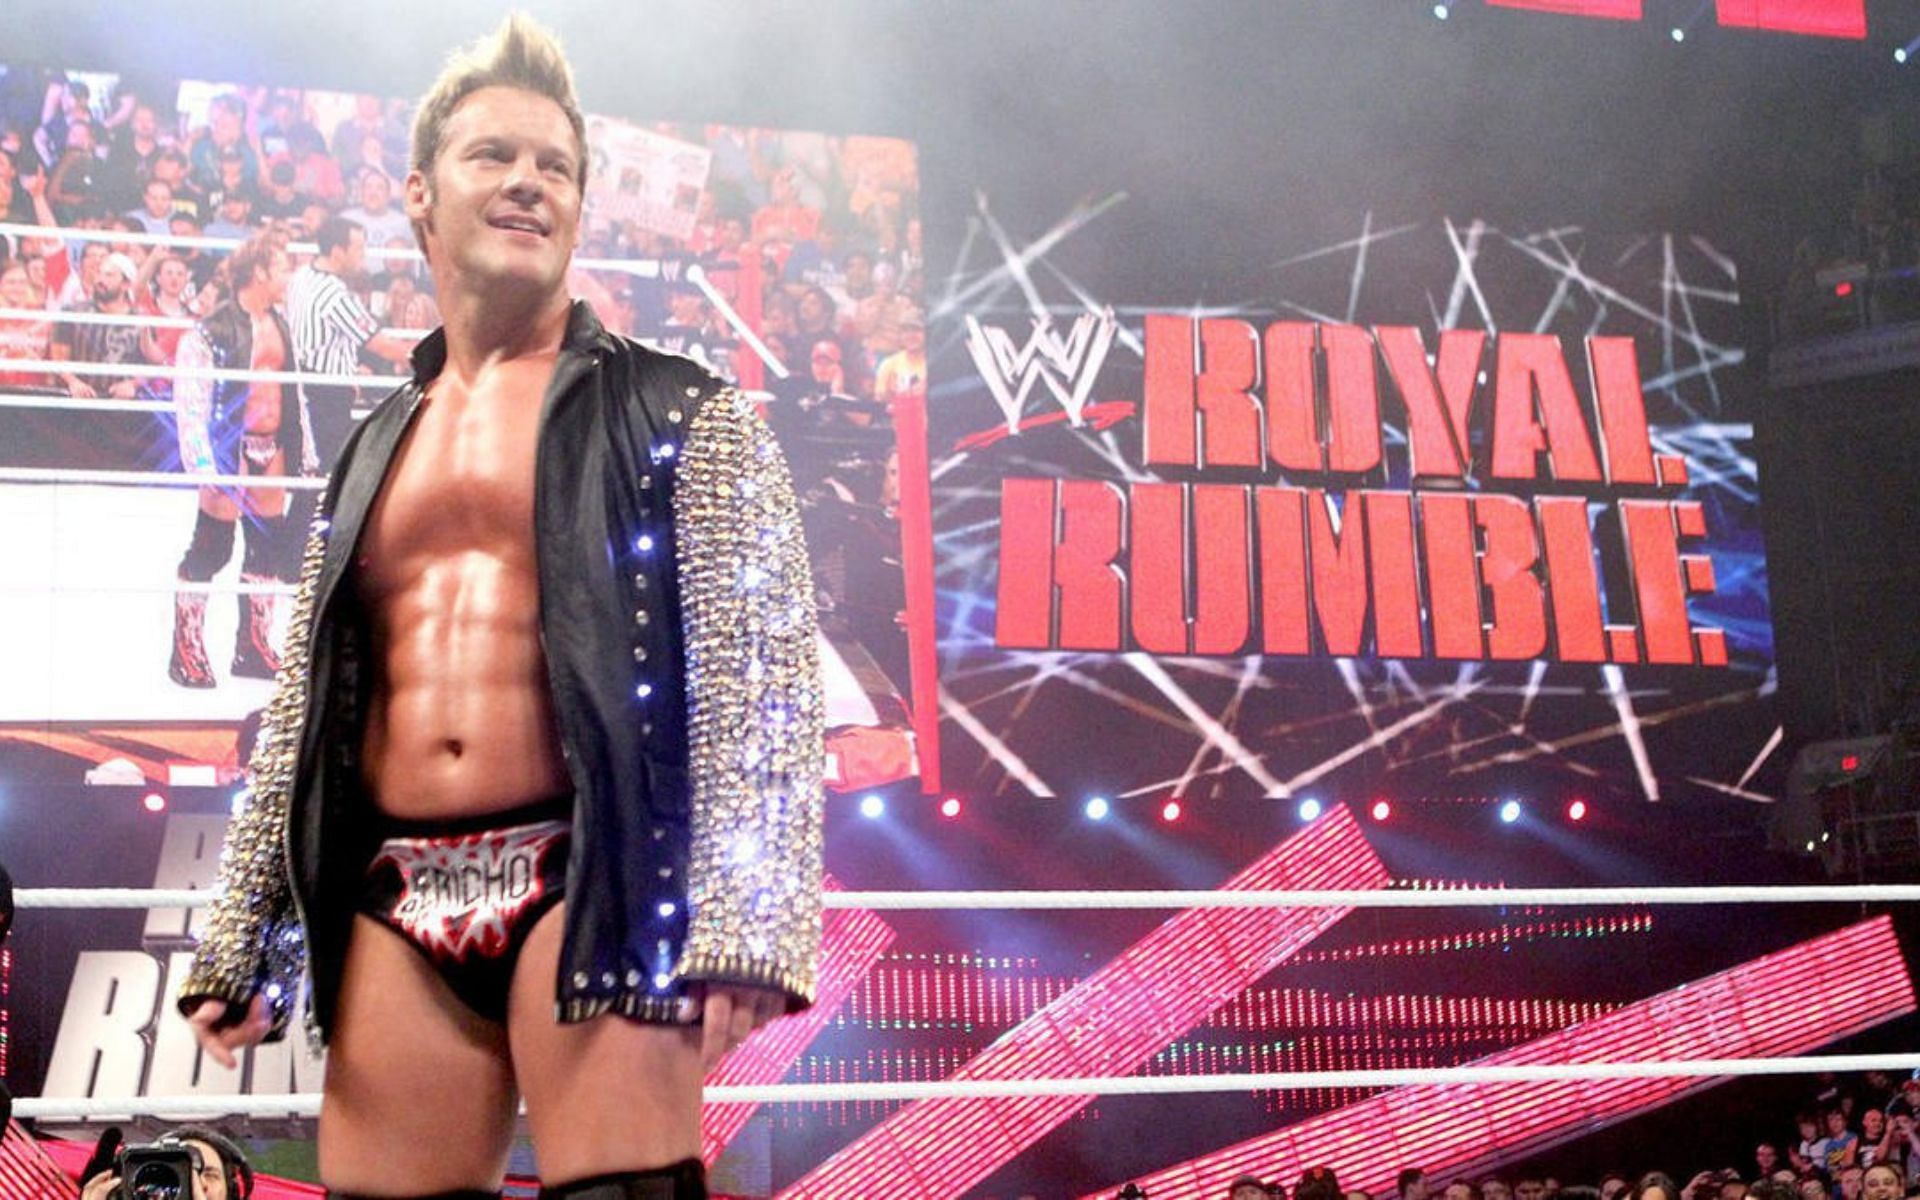 Chris Jericho made a shocking return in 2013!